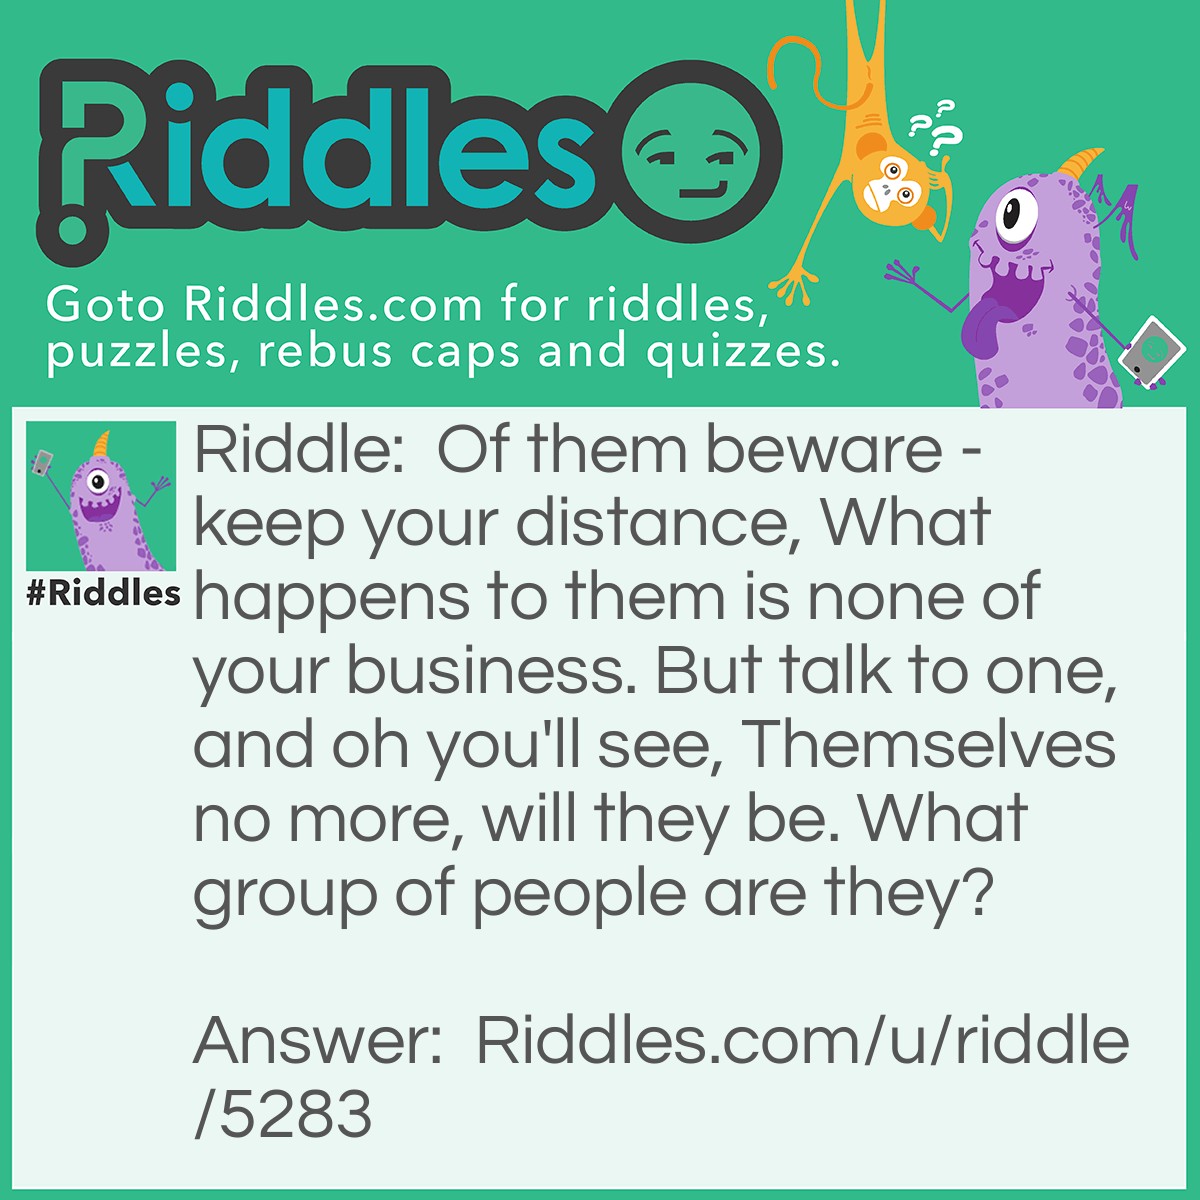 Riddle: Of them beware - keep your distance, What happens to them is none of your business. But talk to one, and oh you'll see, Themselves no more, will they be. What group of people are they? Answer: Strangers. Usually you don't associate with them/stay away from talking to them, but if you talk to one, and get to know them, they are no longer strangers.